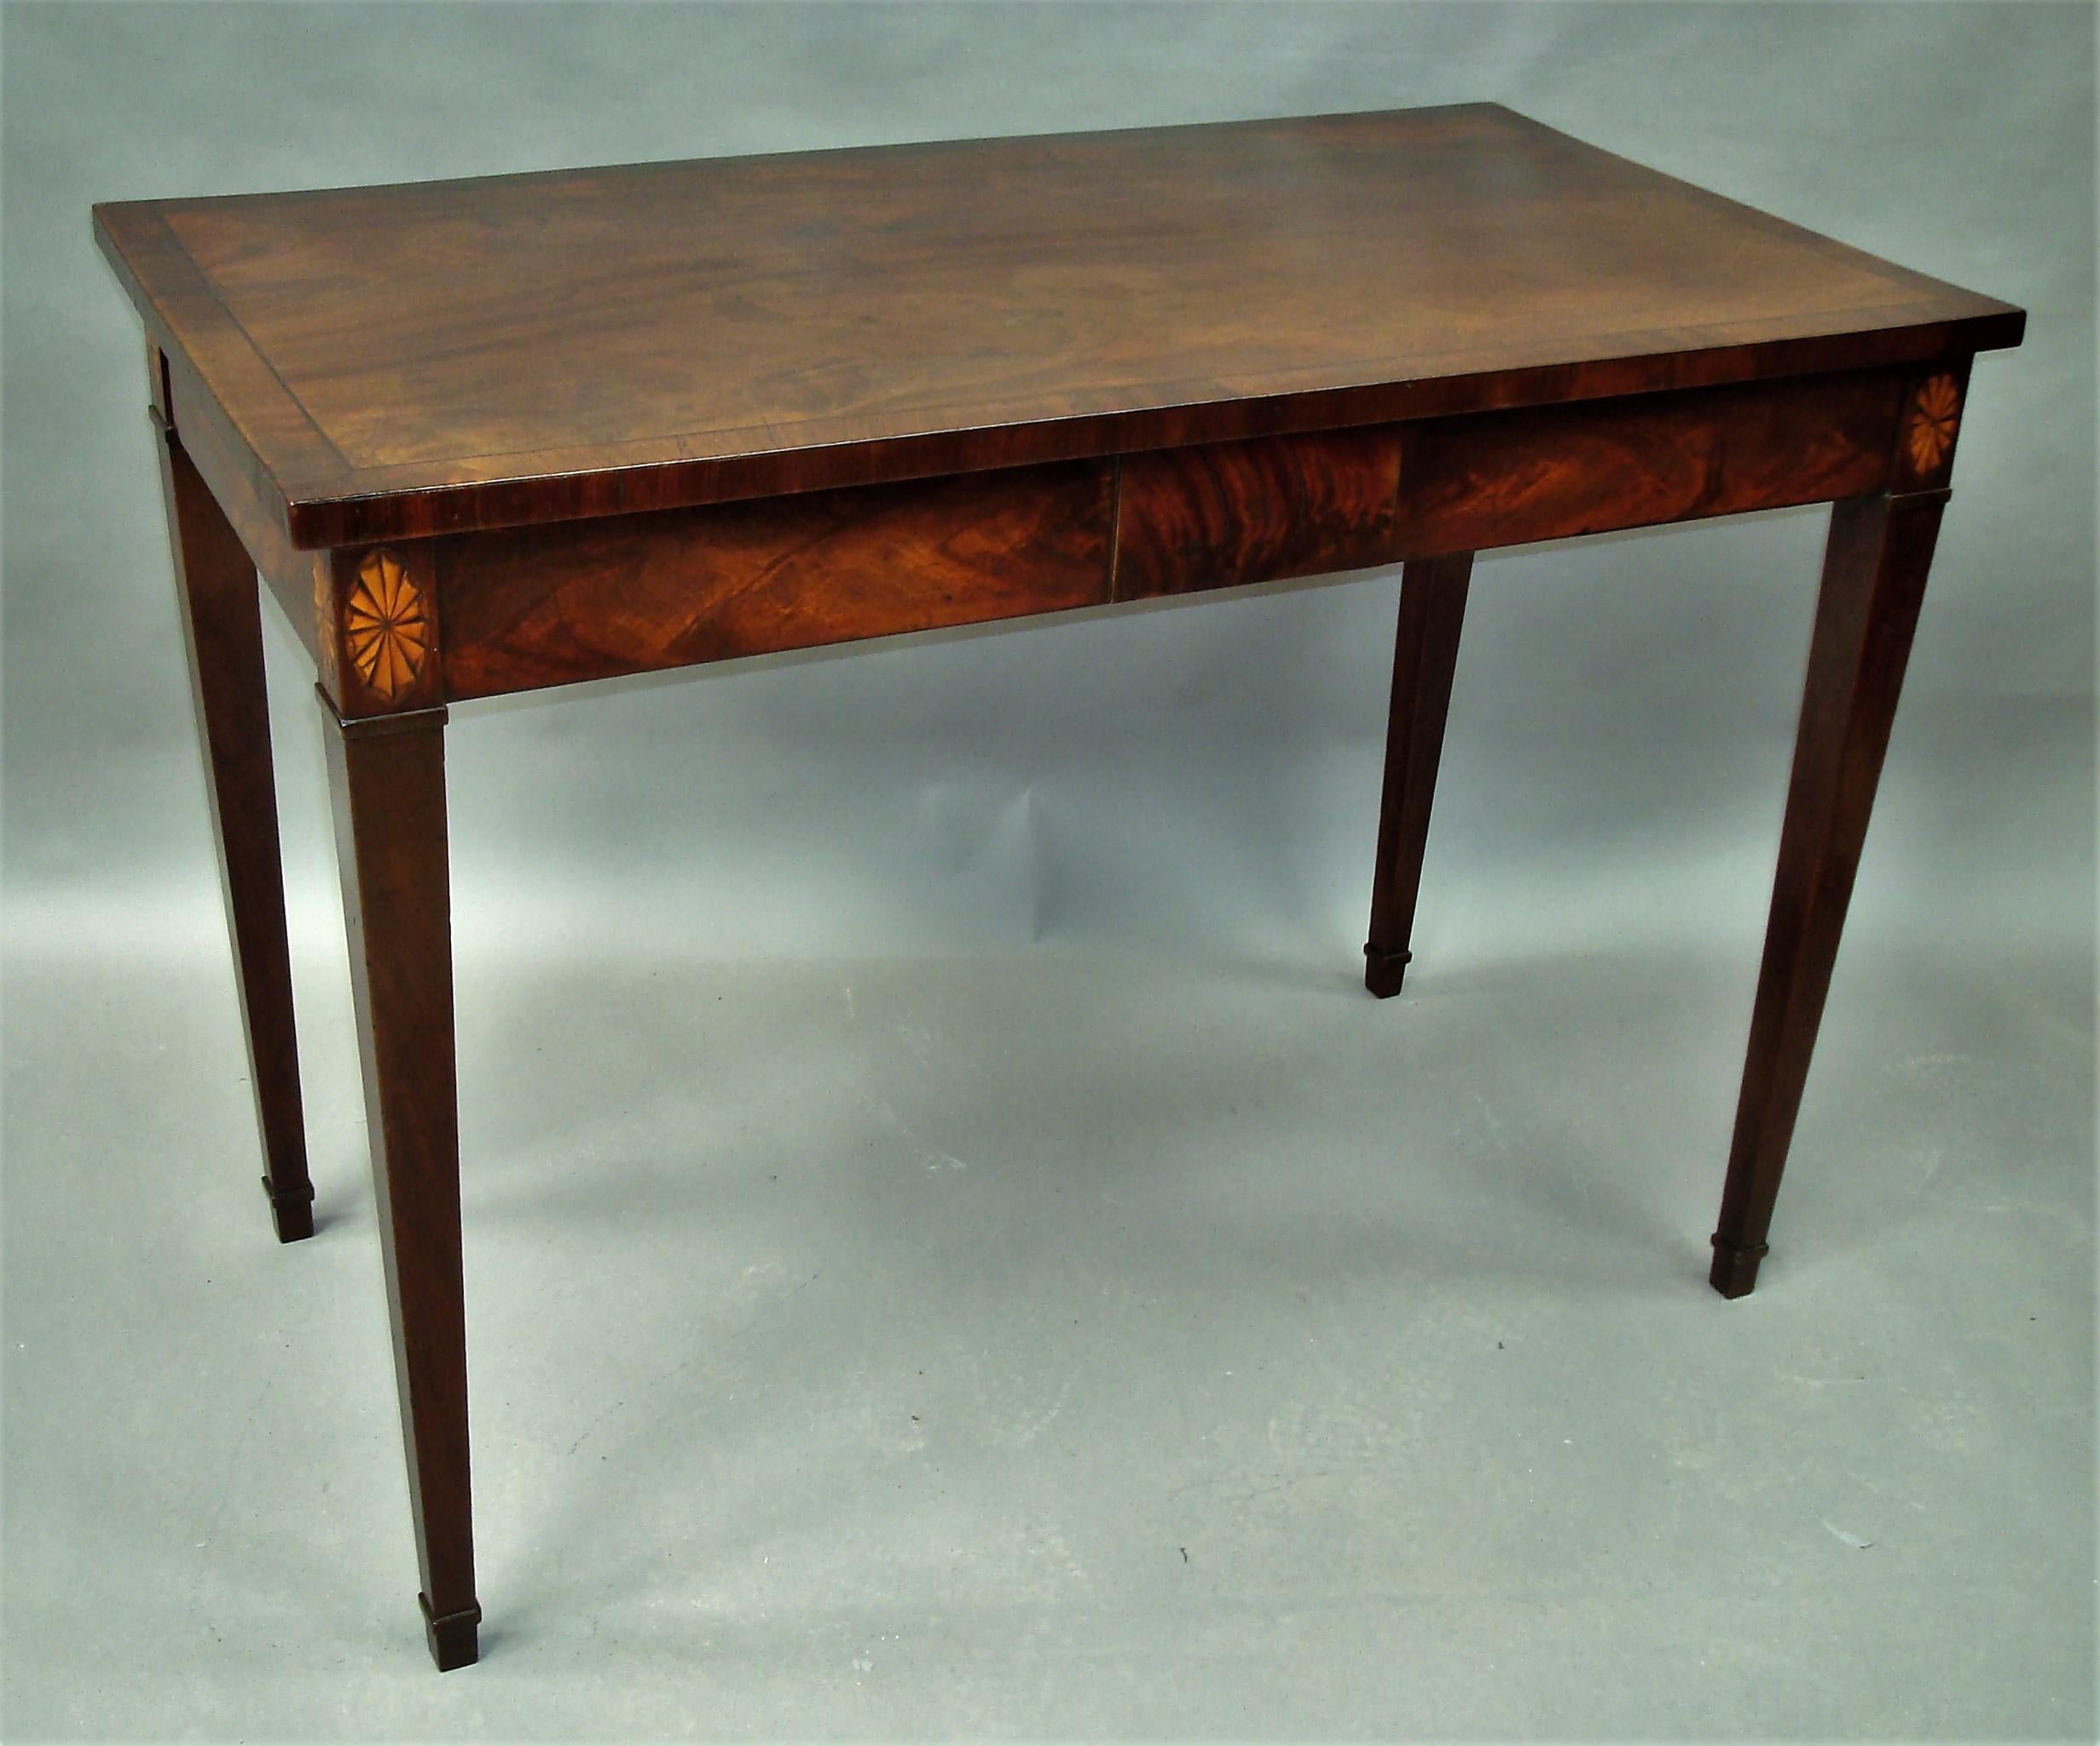 George III Mahogany Side Table or Serving Table In Good Condition For Sale In Moreton-in-Marsh, Gloucestershire